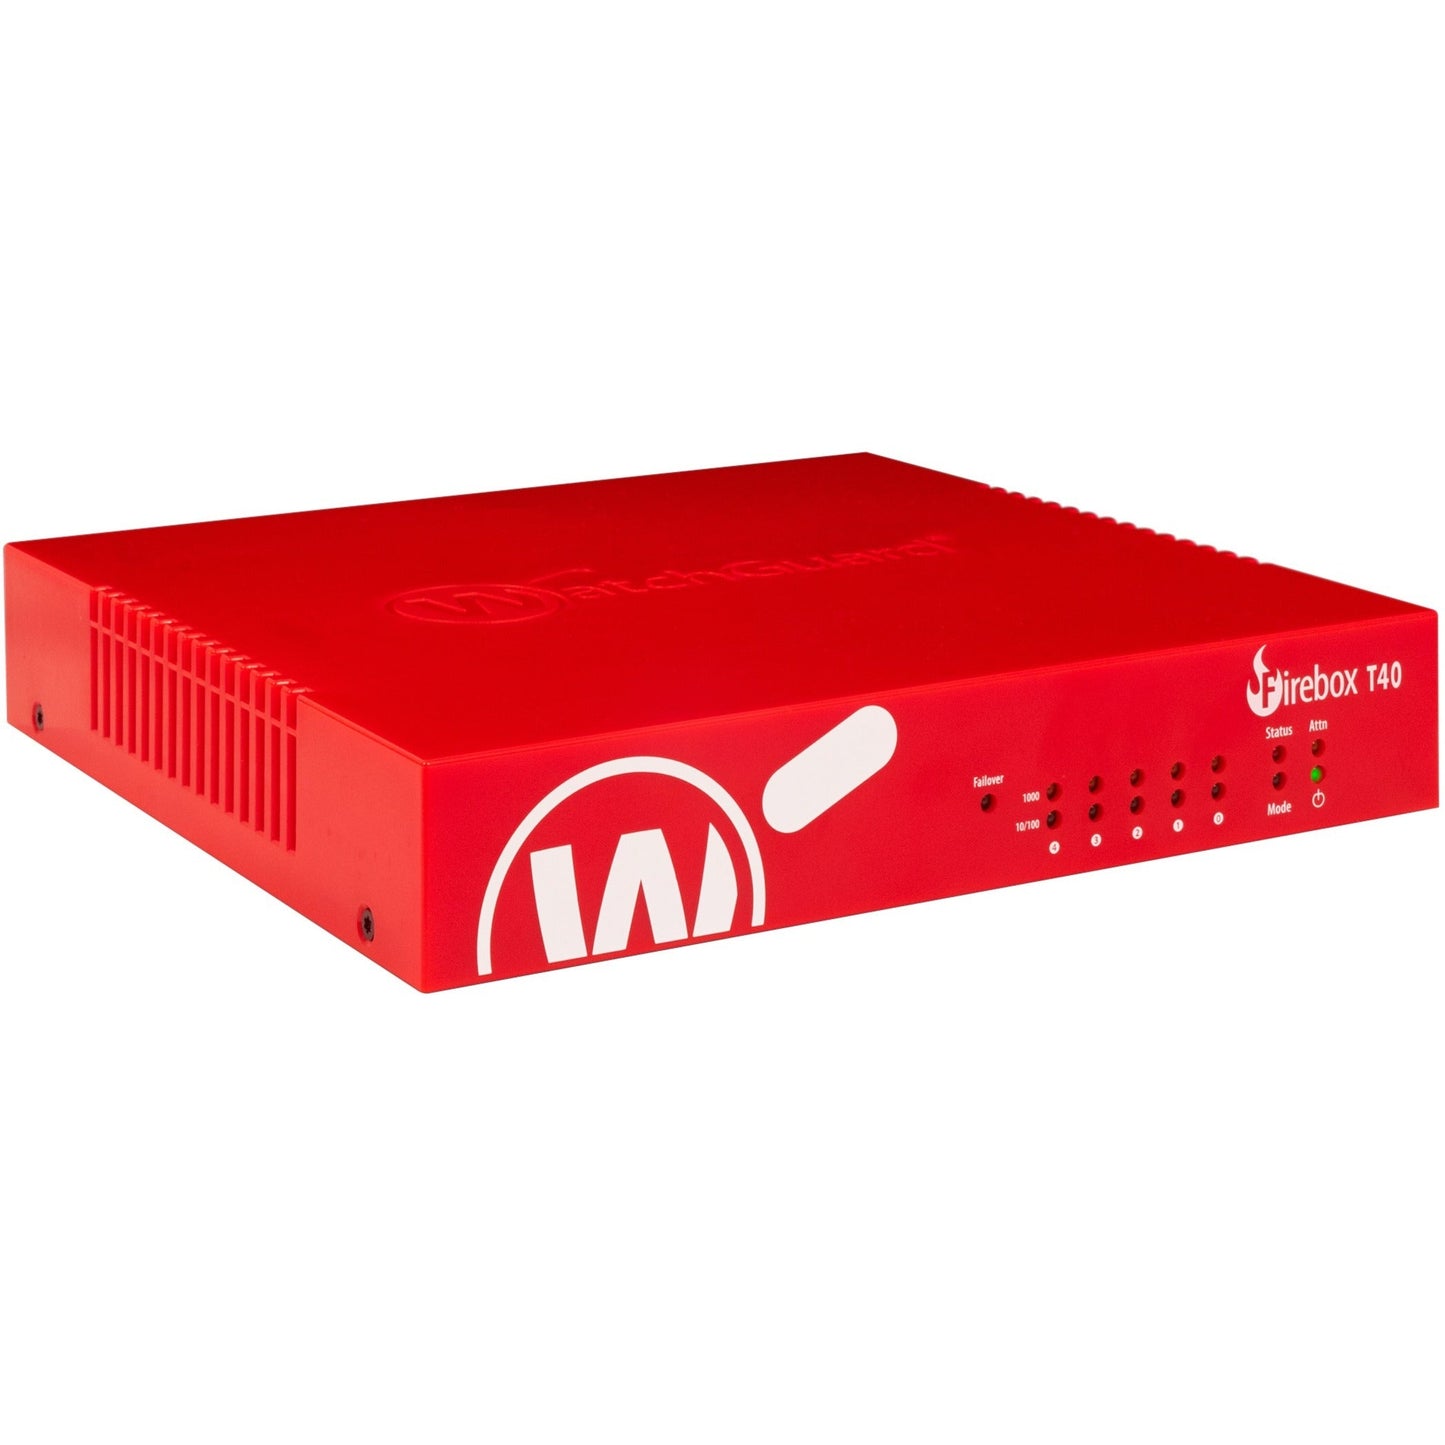 WatchGuard Trade Up to WatchGuard Firebox T40 with 1-yr Basic Security Suite (US)